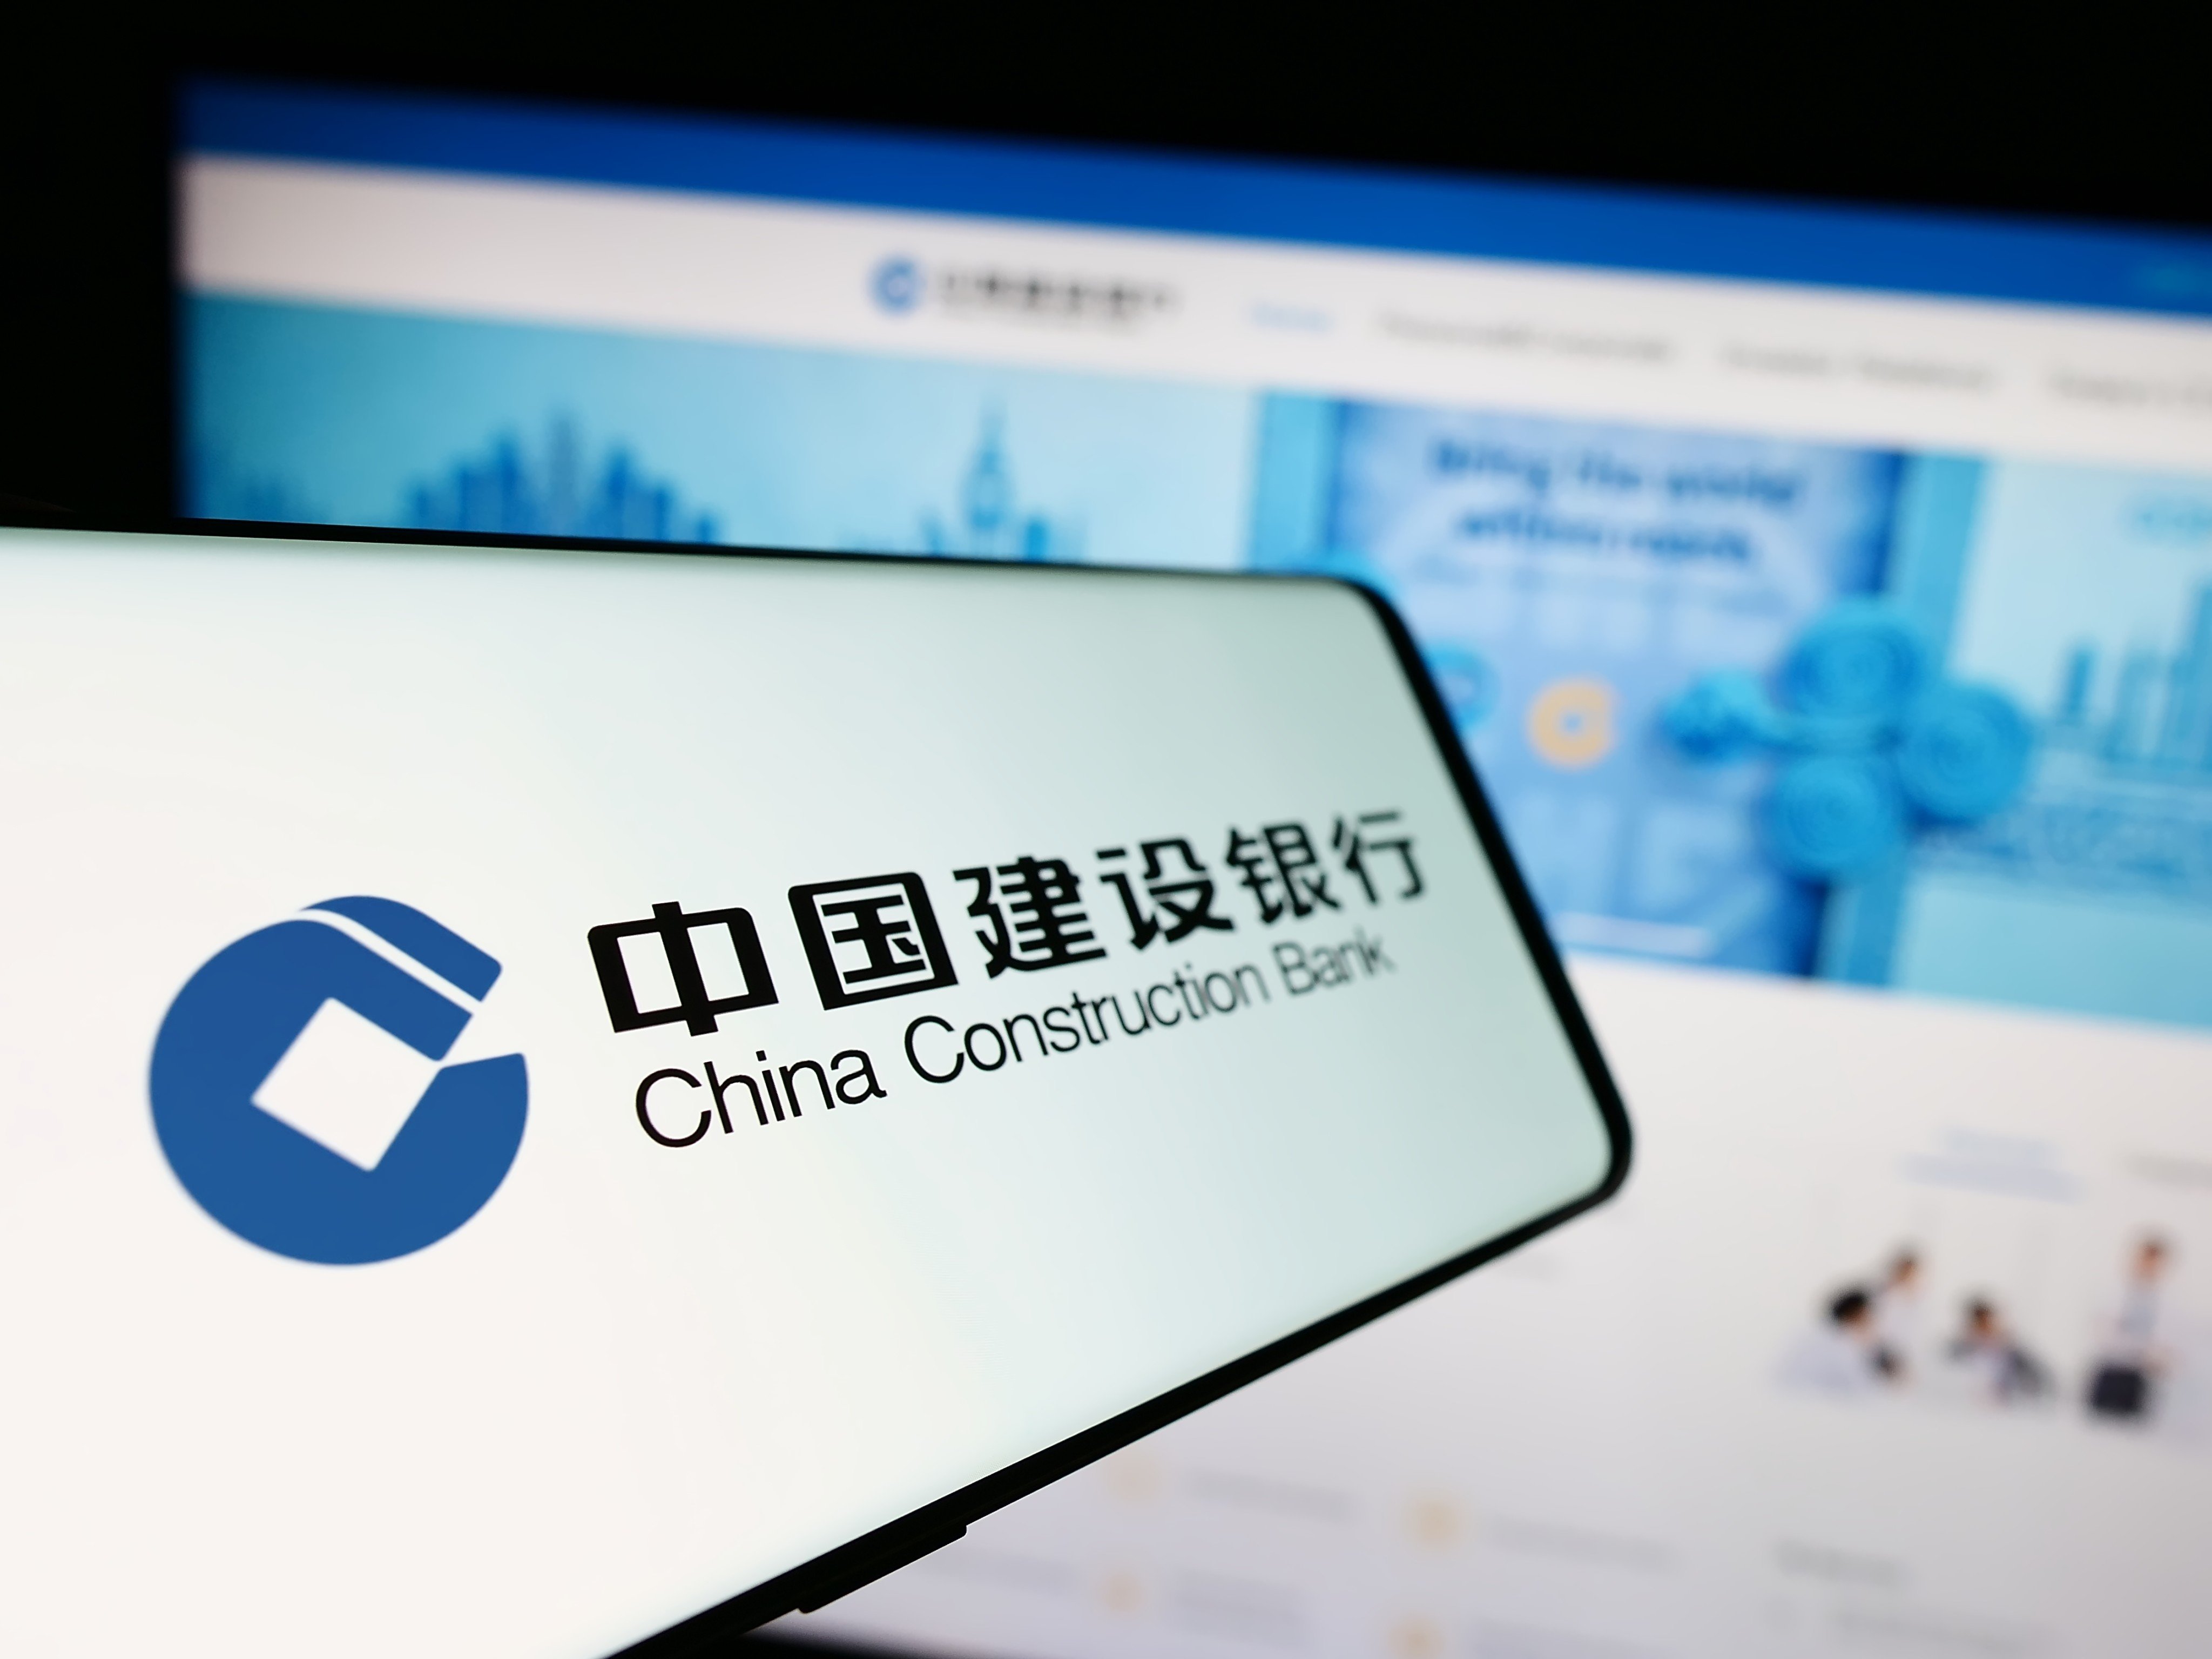 China Construction Bank, the country’s second-largest bank by assets, remains confident in the strategic policy measures being pursued by Beijing. Photo: Shutterstock